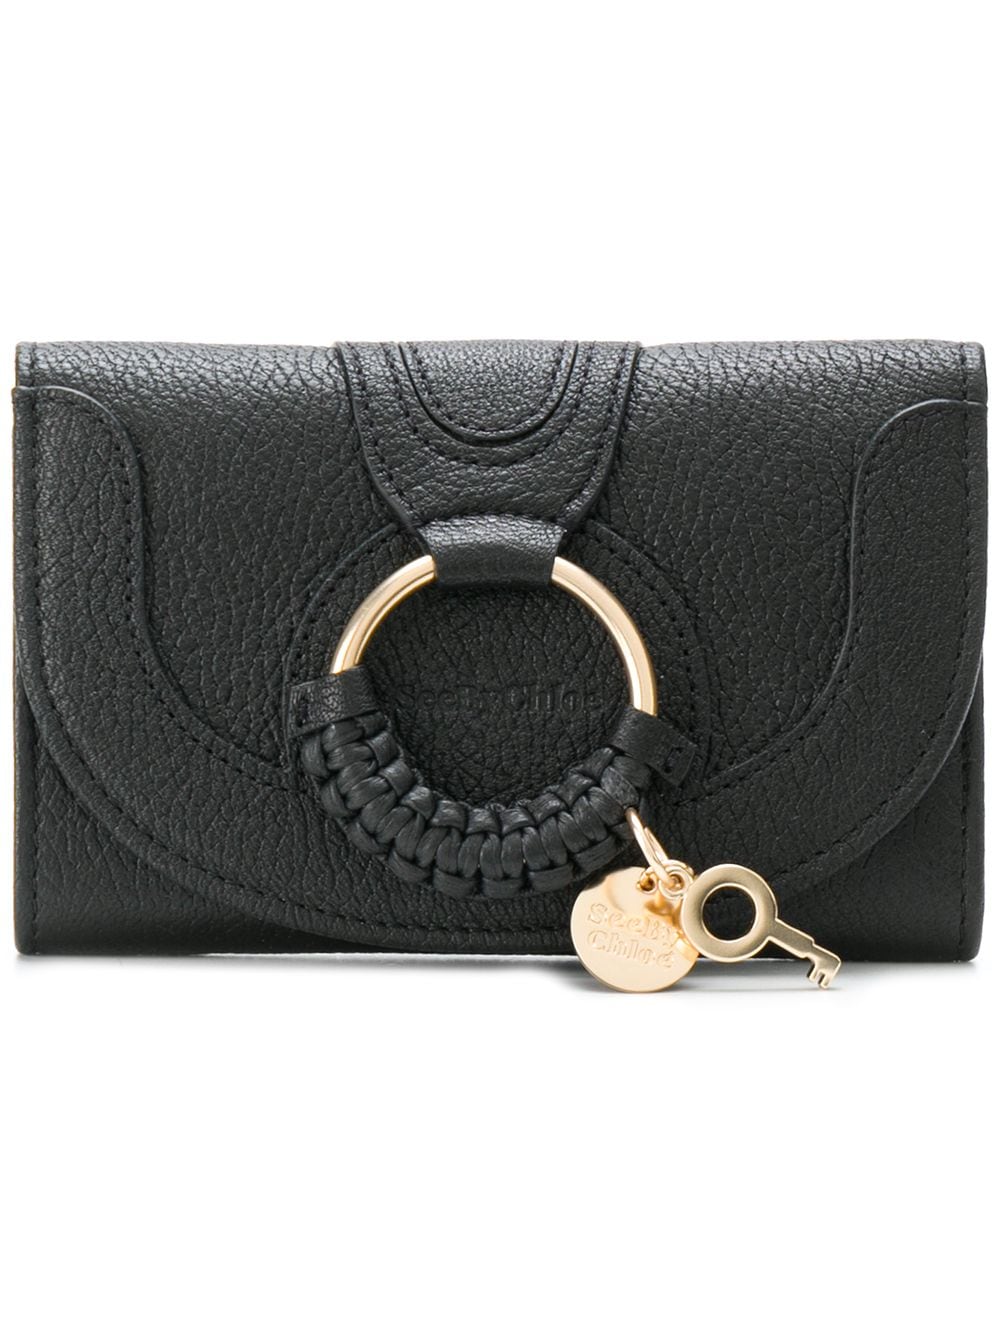 See by Chloé Hana leather wallet - Black von See by Chloé